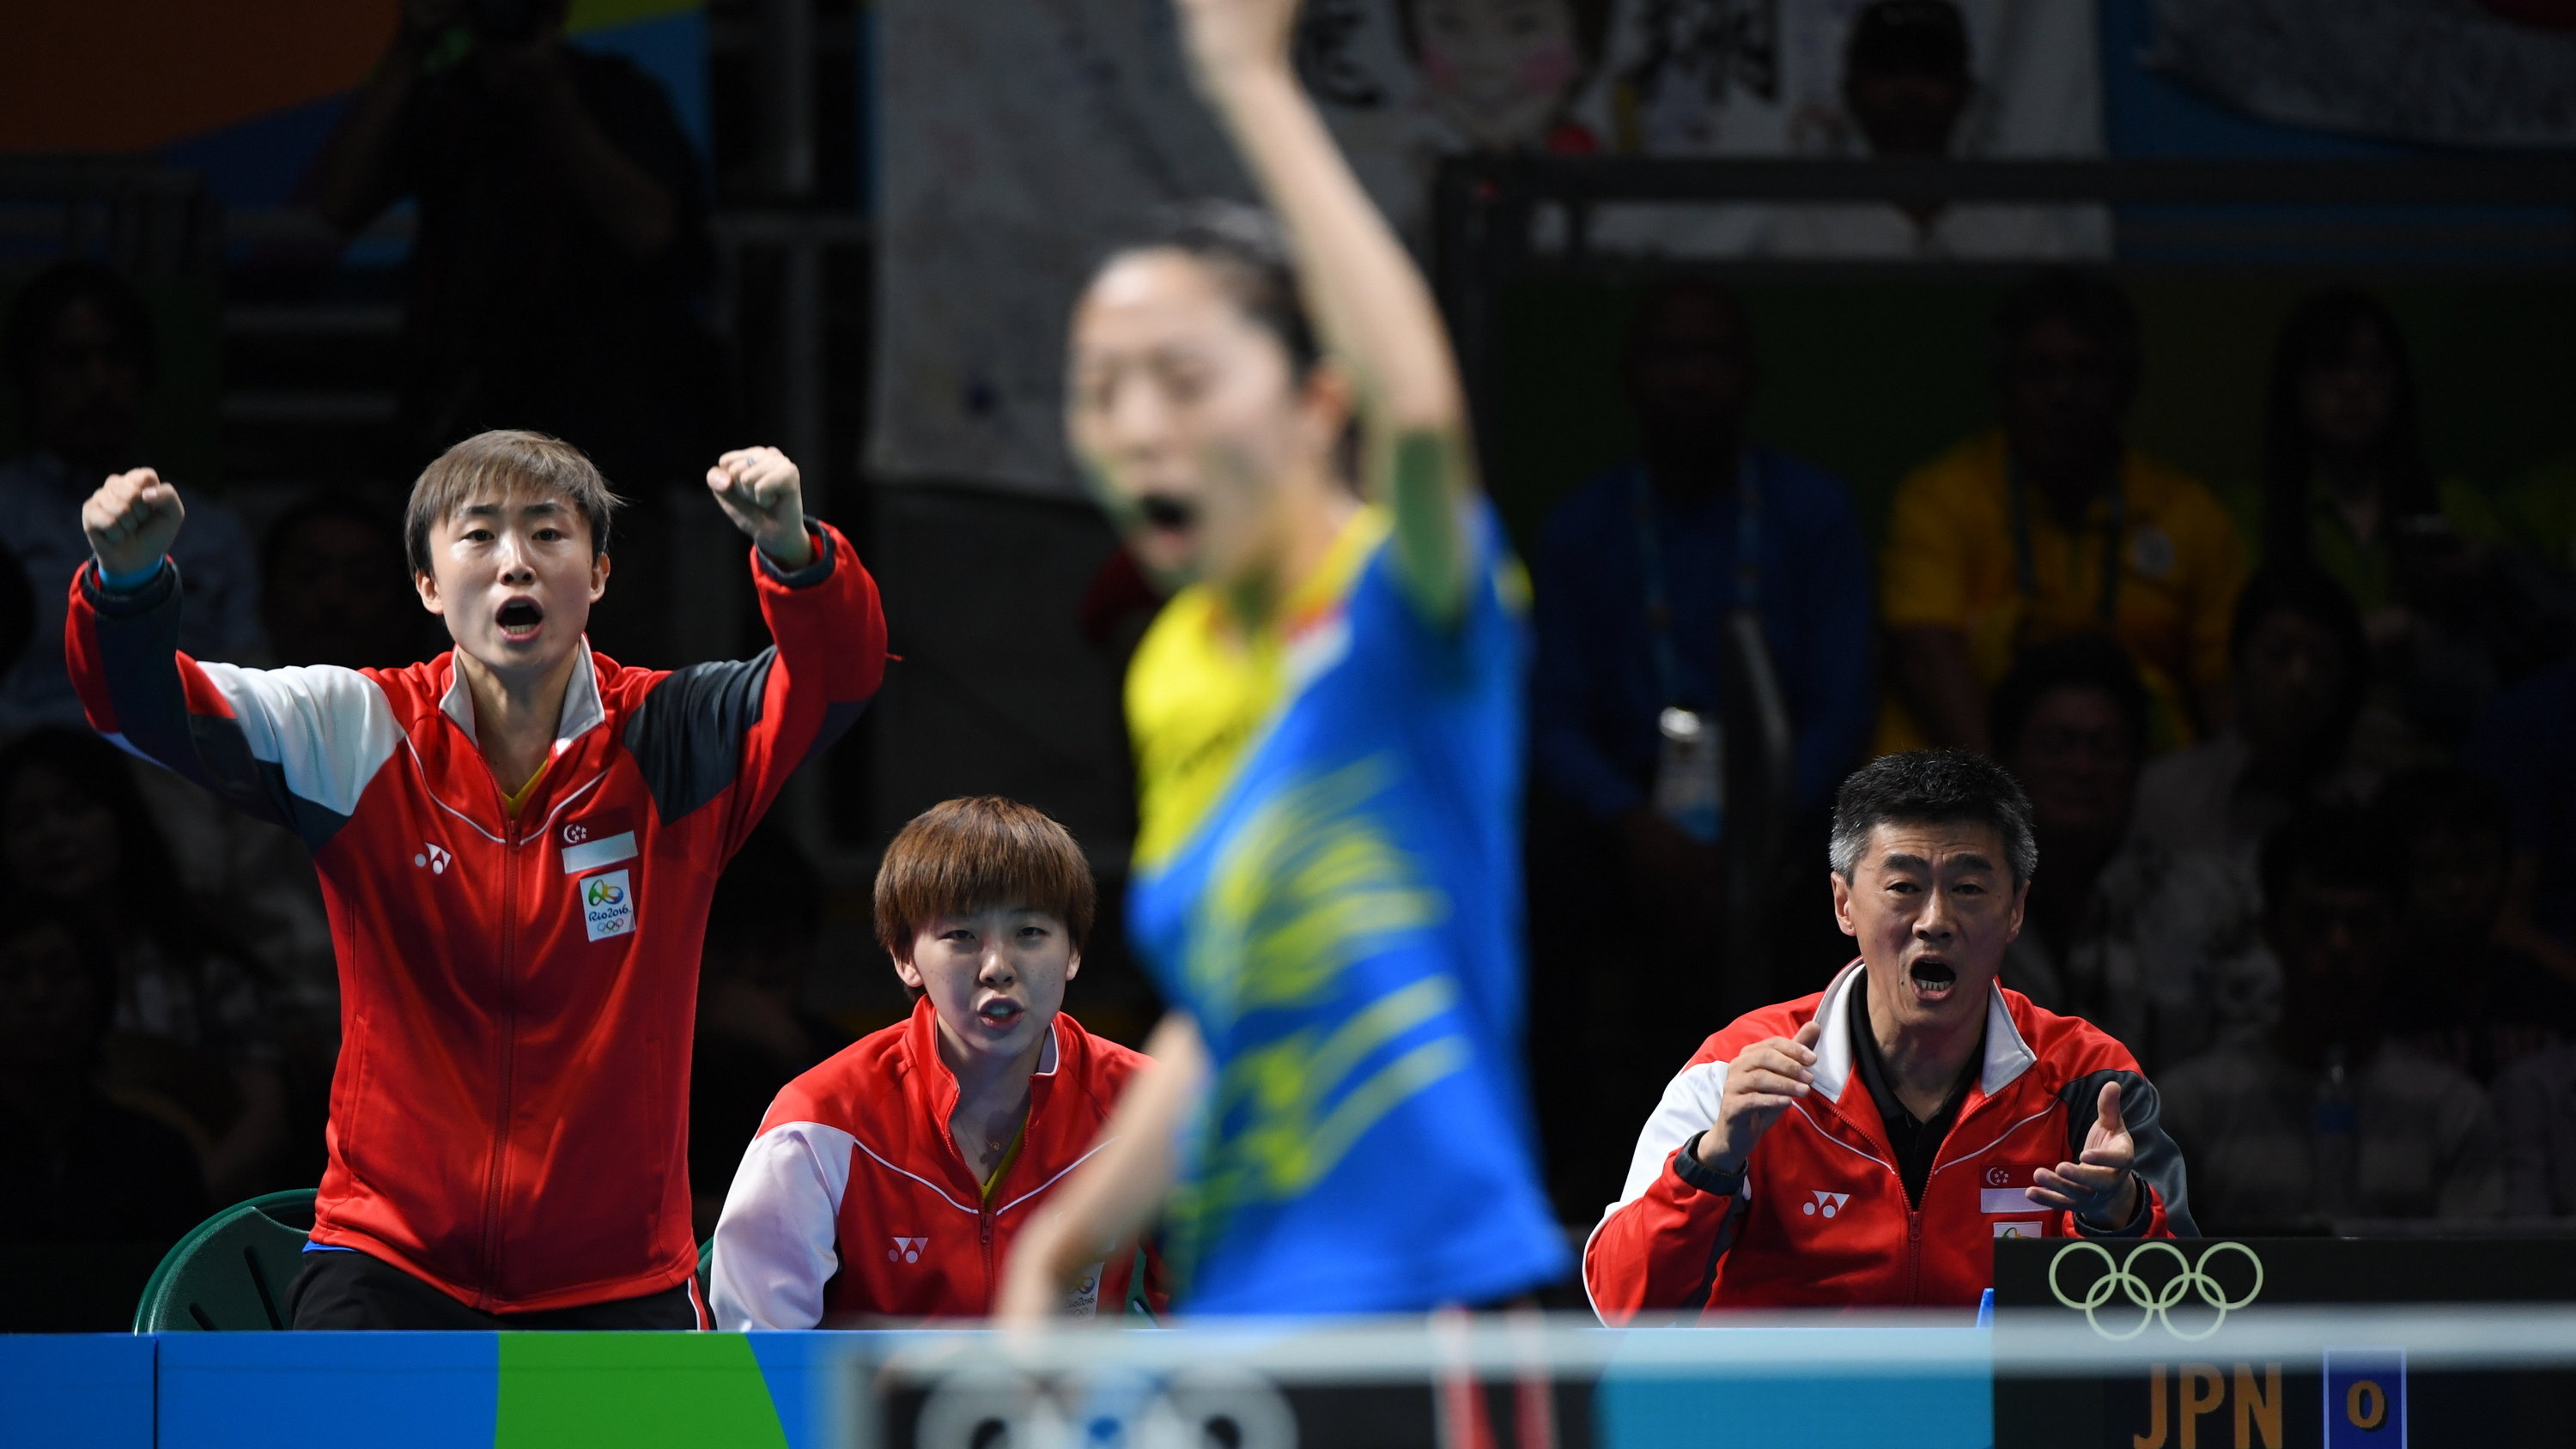 Table Tennis: Rio 2016 Summer Olympics, At Least 44 Table Tennis Players Are Chinese-Born, Six Play for China. 3000x1690 HD Background.